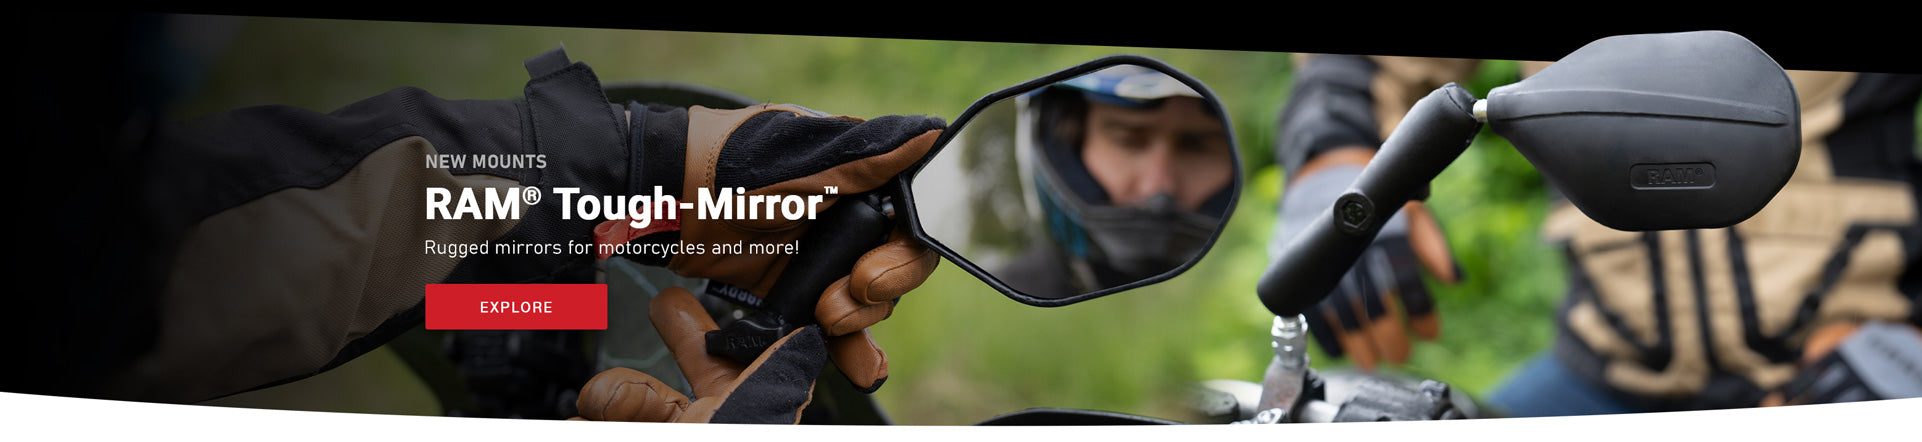 Banner image featuring the new RAM® Tough-Mirror™ coming soon